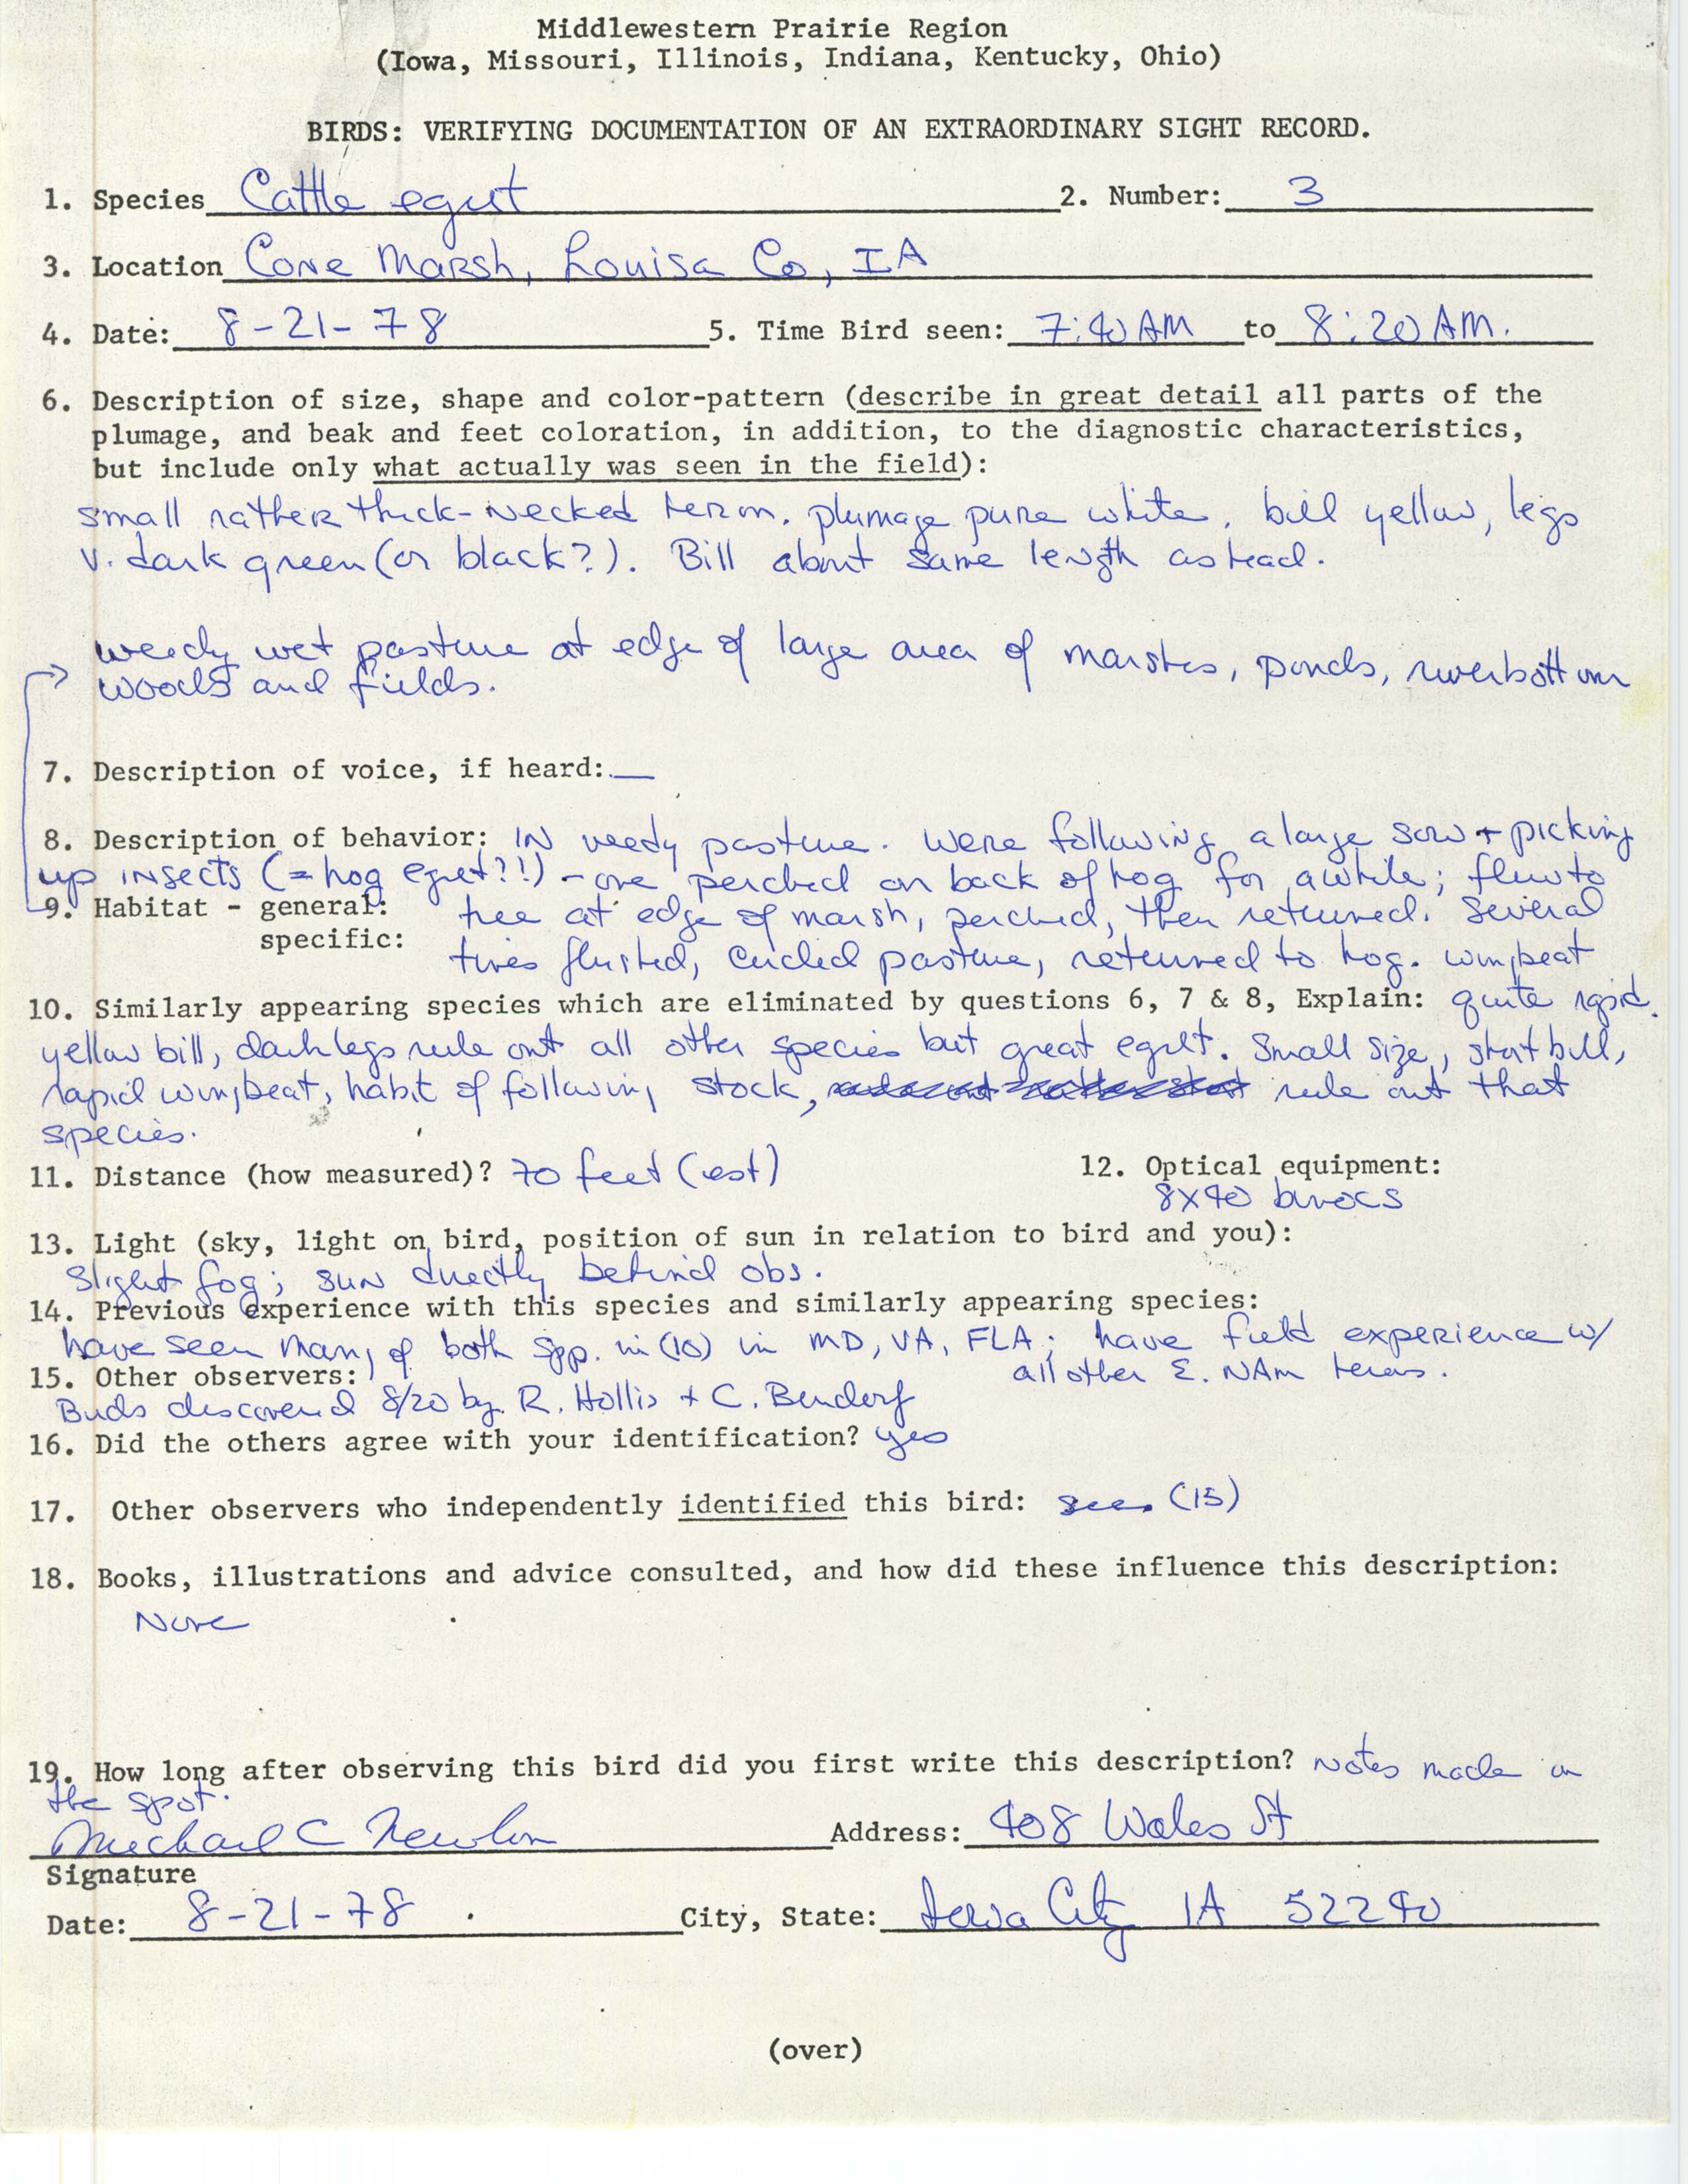 Rare bird documentation form for Cattle Egret at Cone Marsh, 1978